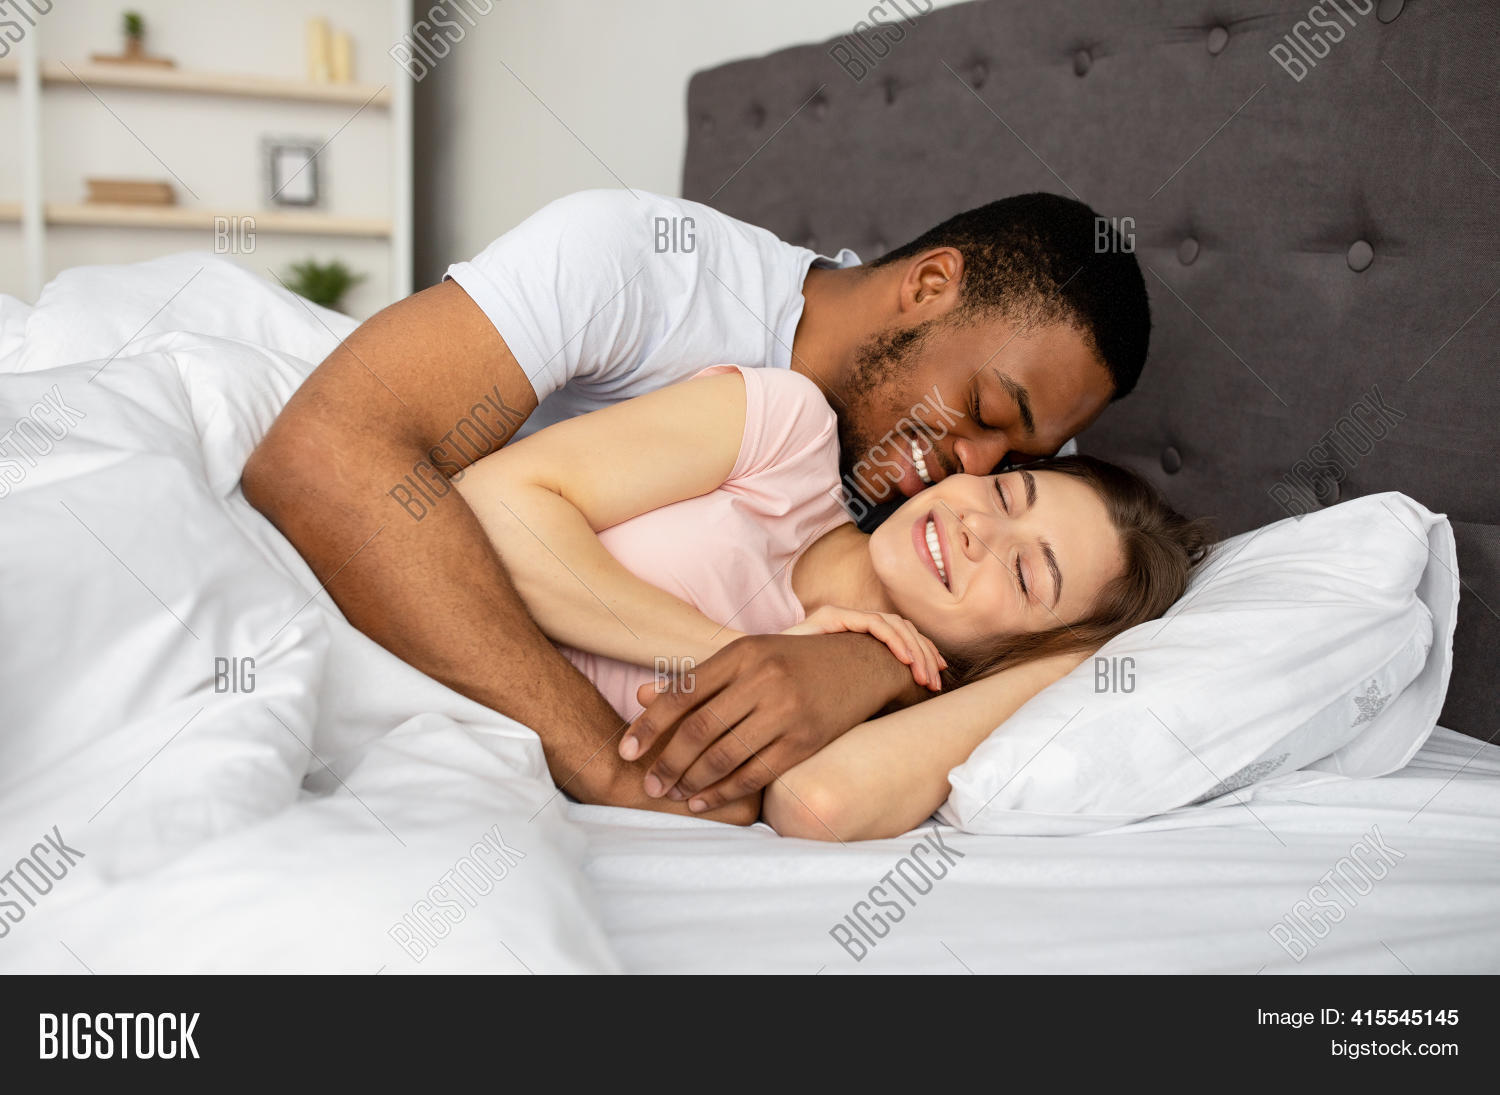 cheng qin recommends Pictures Of Interracial Couples Cuddling